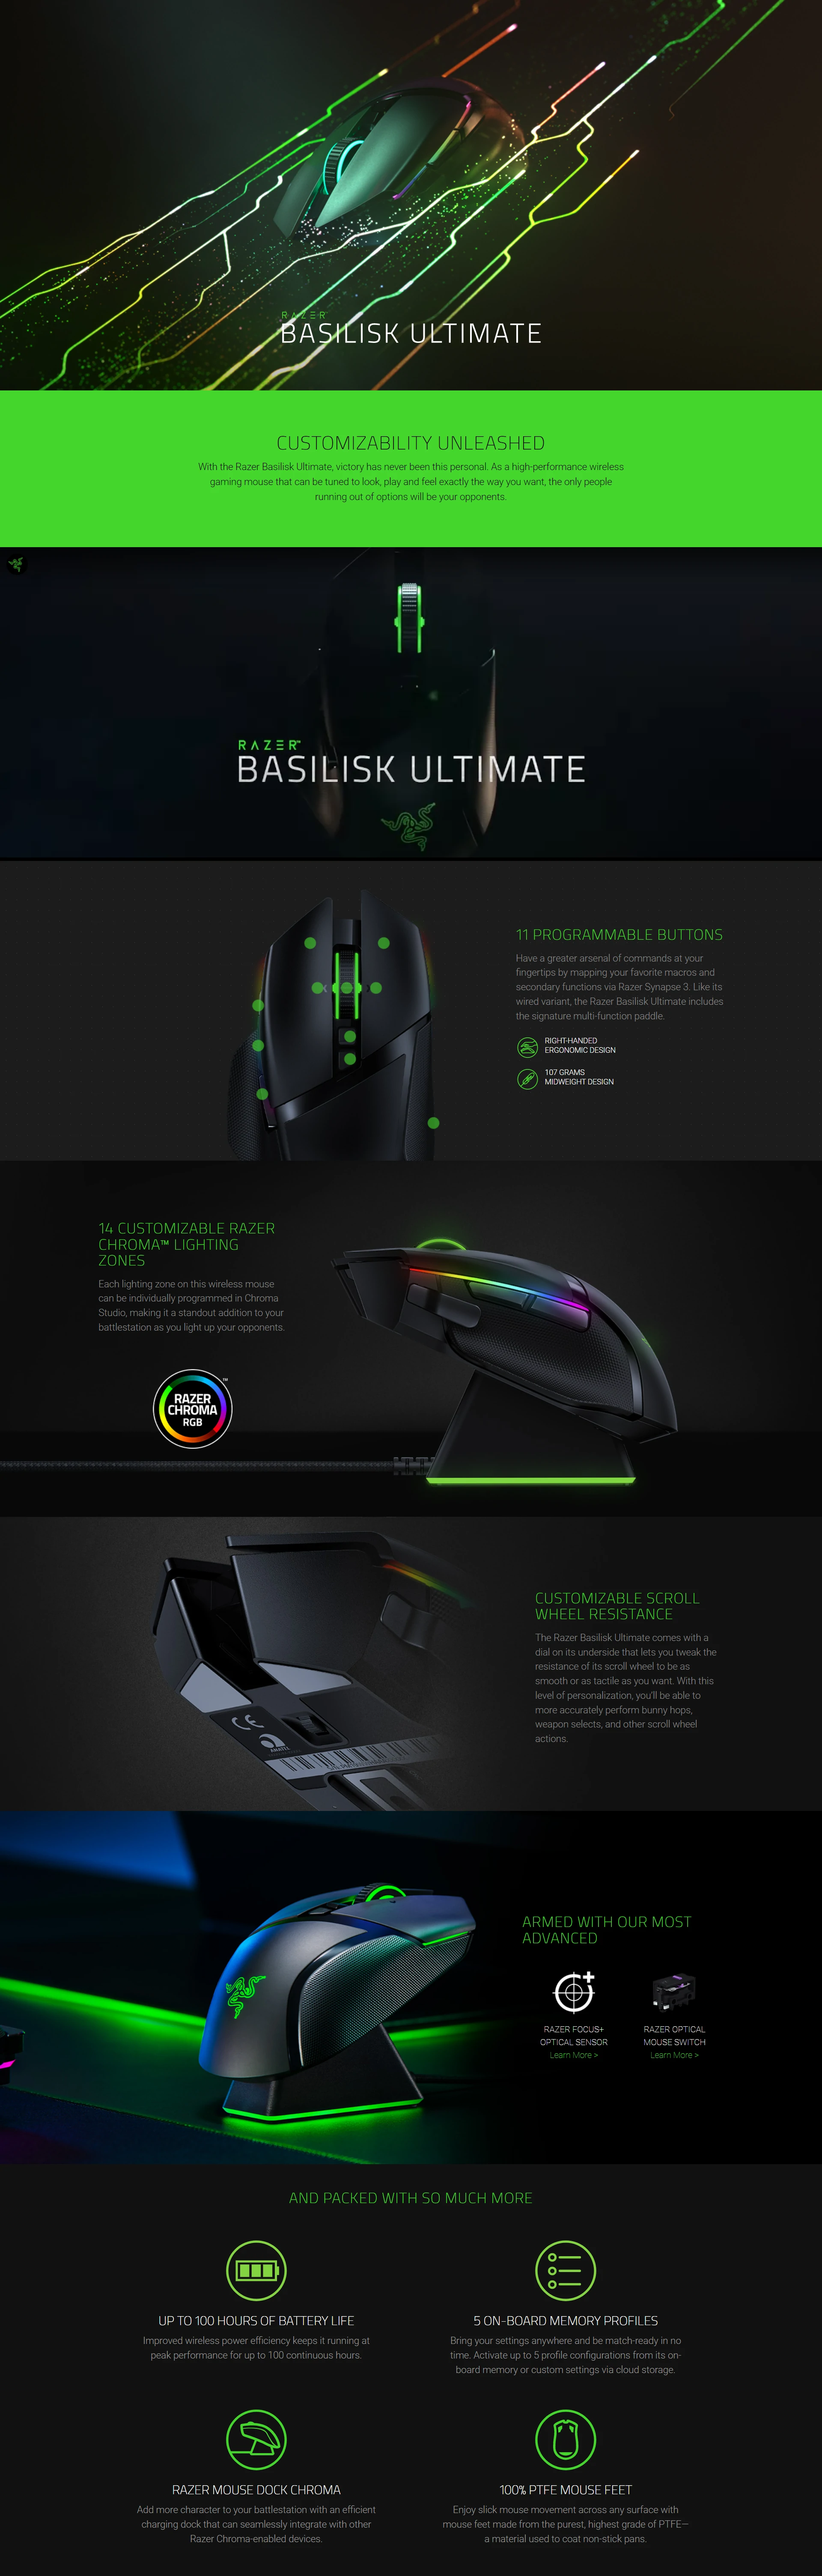 Overview - Razer Basilisk Ultimate Wireless Gaming Mouse with 11 Programmable Buttons